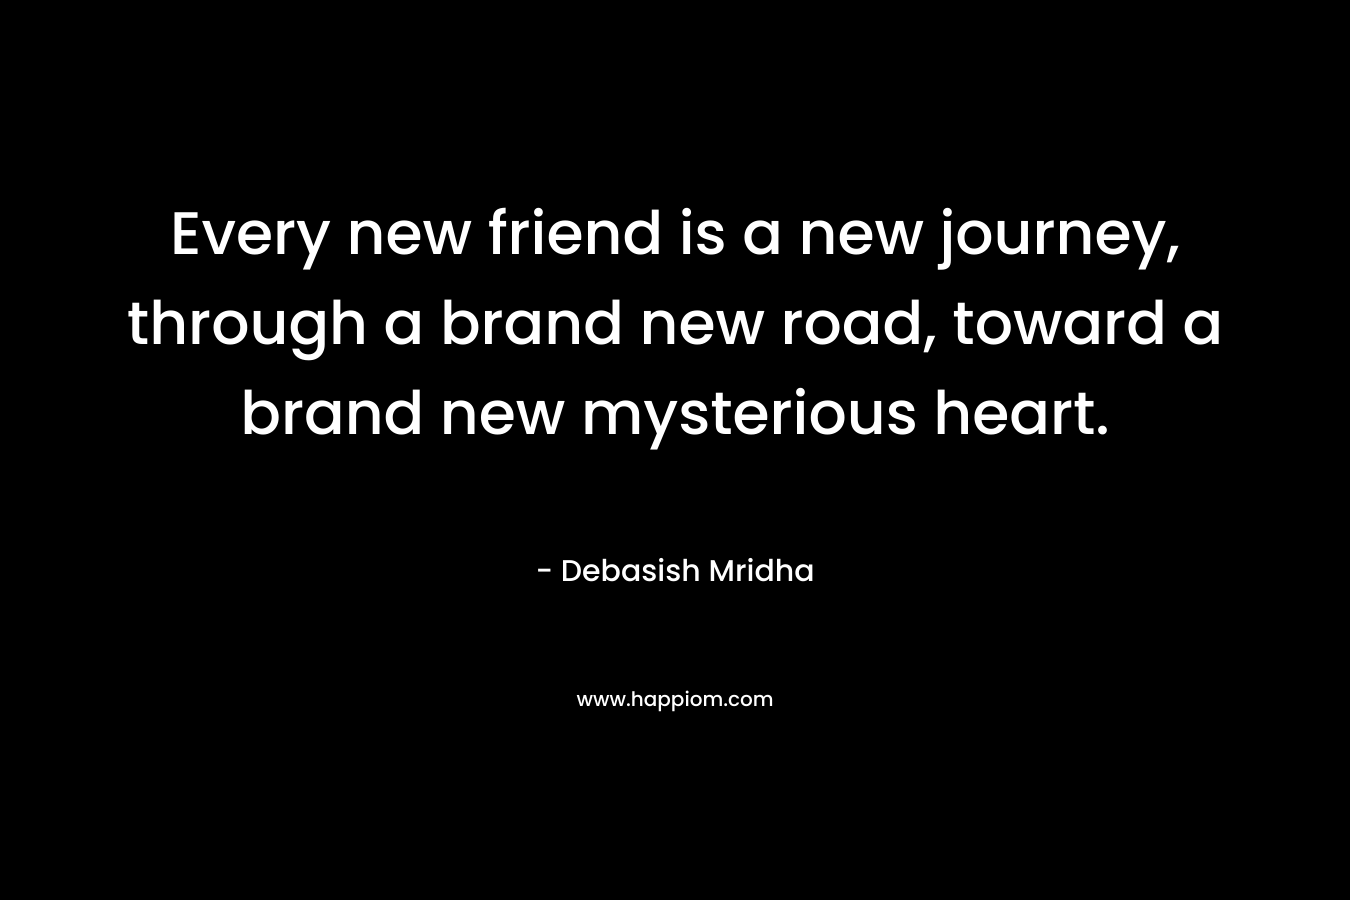 Every new friend is a new journey, through a brand new road, toward a brand new mysterious heart.